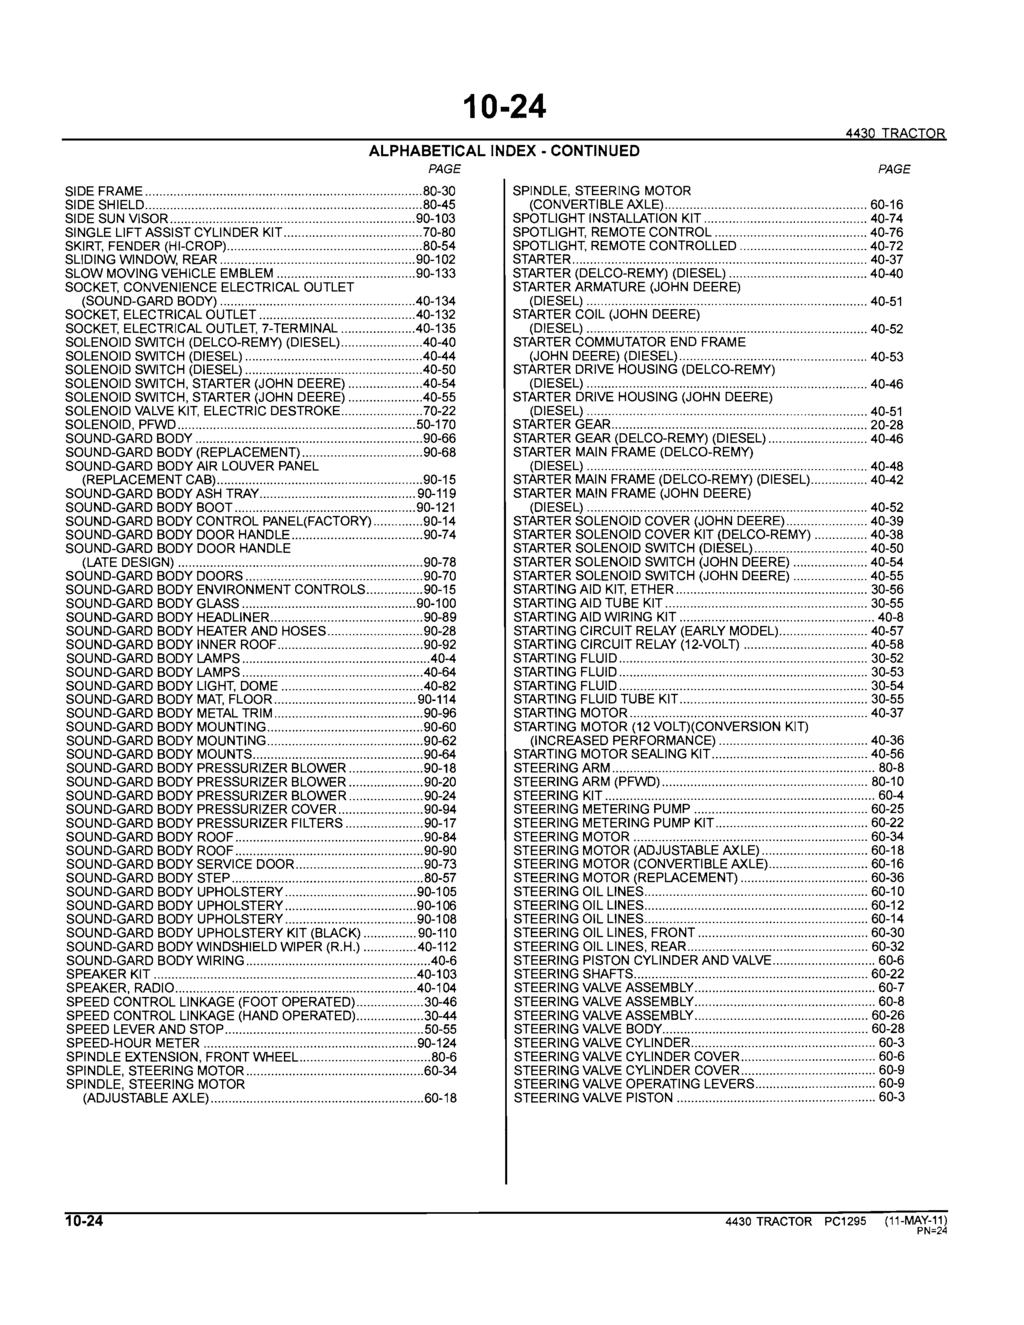 10-24 ALPHABETICAL INDEX - CONTINUED PAGE 4430 TRACTOR SIDE FRAME... 80-30 SPINDLE, STEERING MOTOR SIDE SHIELD... 80-45 (CONVERTIBLE AXLE)... 60-16 SIDE SUN ViSOR... 90-103 SPOTLIGHT INSTALLATION KIT.